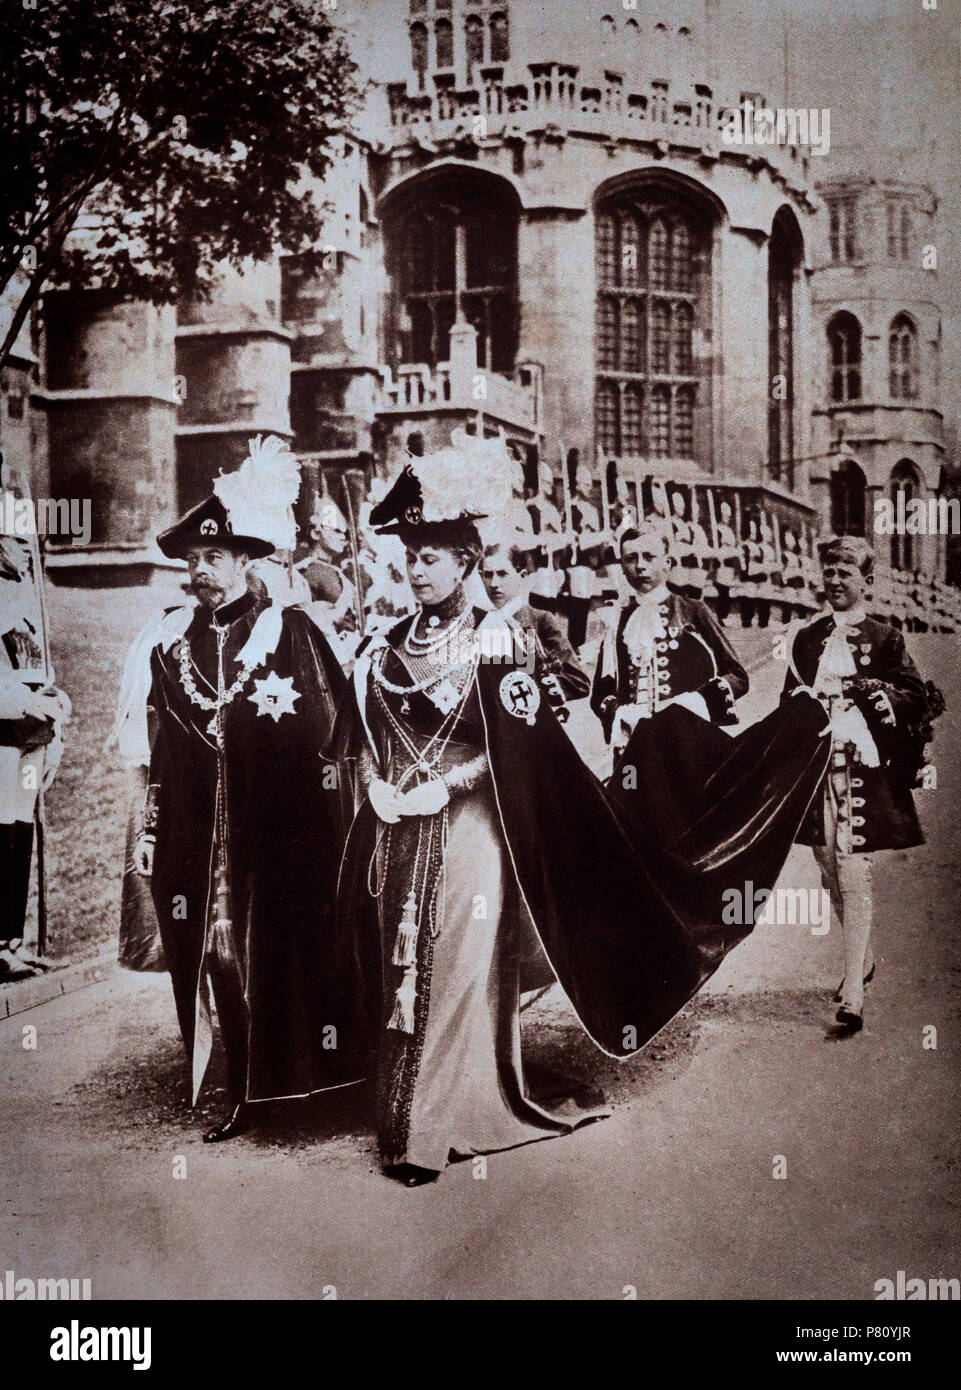 King George V and Queen Mary in the robes and insignia of the Order of the Garter (formally the Most Noble Order of the Garter), an order of chivalry founded by Edward III in 1348 and regarded as the most prestigious British order of chivalry (though in precedence inferior to the military Victoria Cross and George Cross) in England and the United Kingdom. It is dedicated to the image and arms of Saint George, England's patron saint. Stock Photo